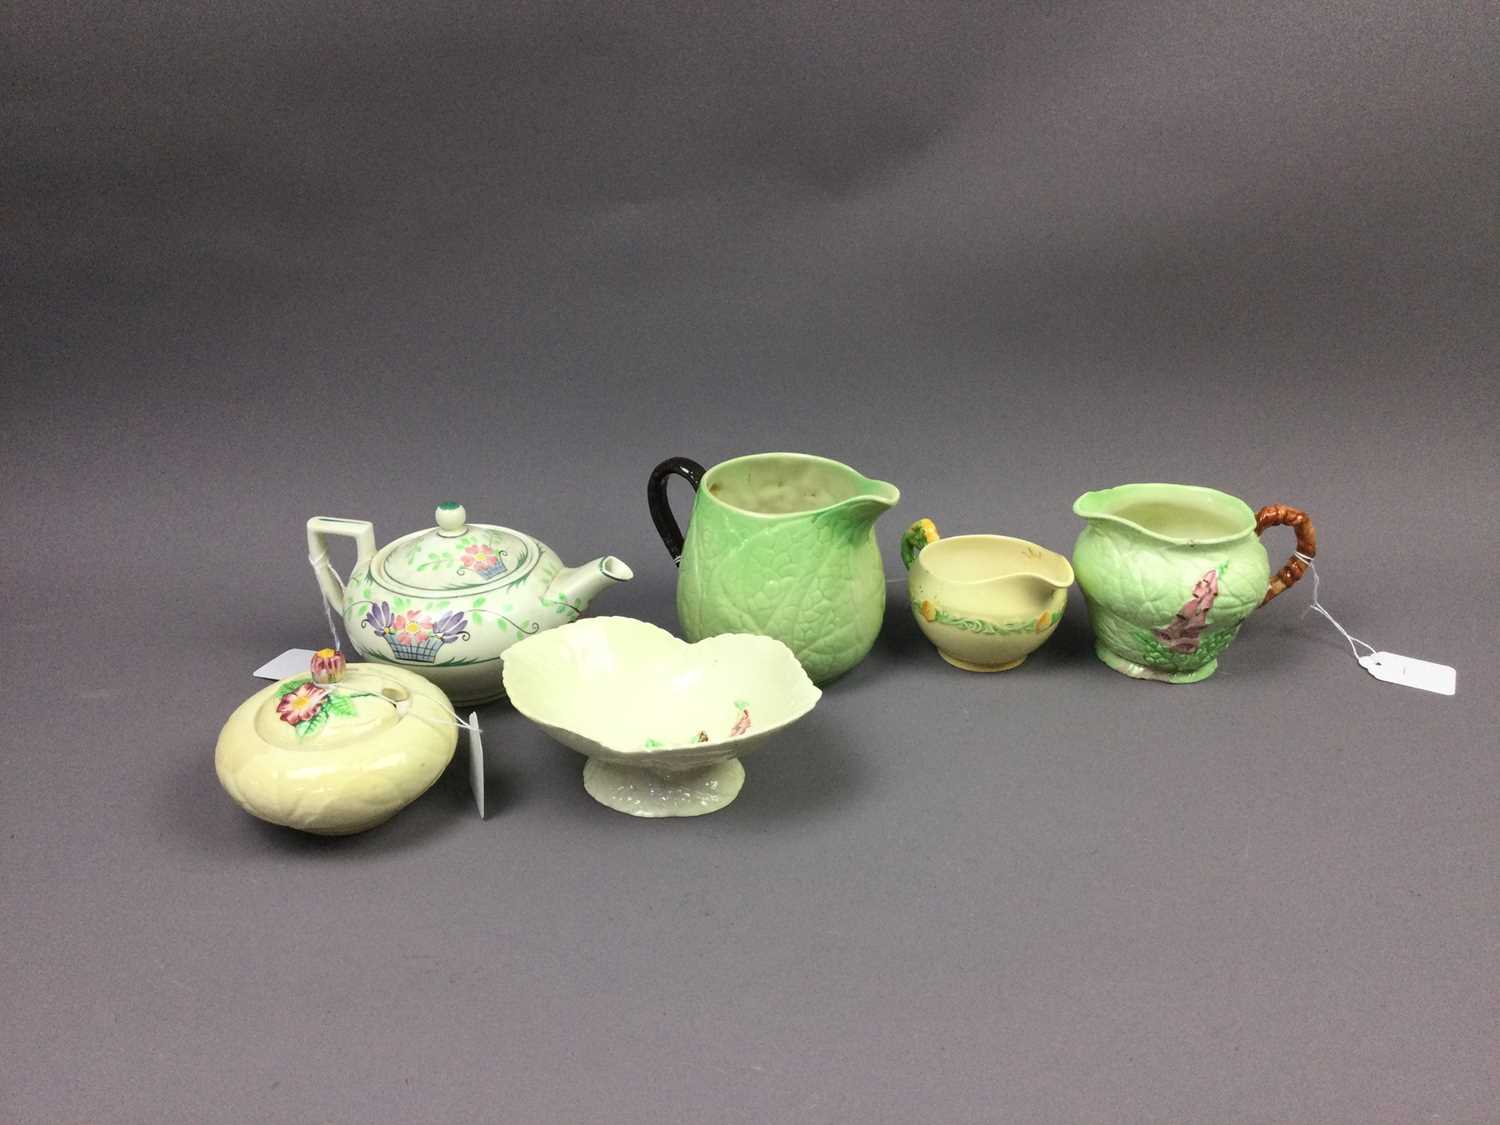 Lot 119 - A CARLTON WARE LEAF CREAM AND MILK JUG ALONG WITH OTHER CERAMICS